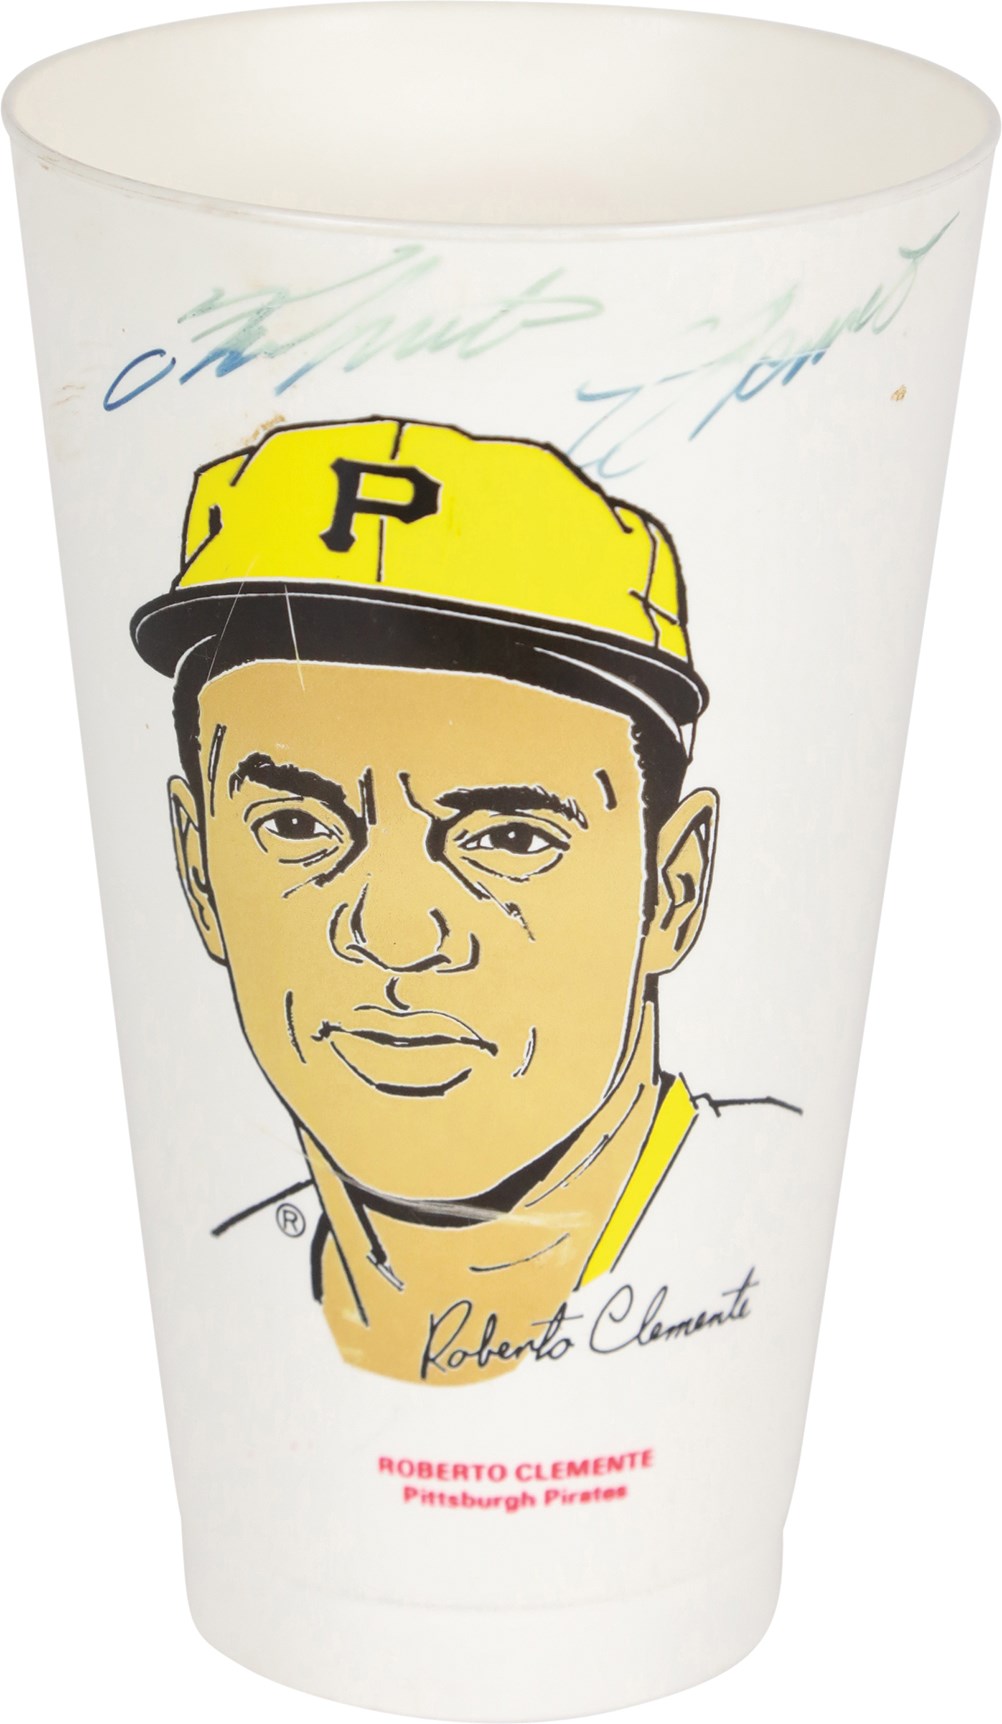 - Only Known 1972 Roberto Clemente Signed 7-Eleven Slurpee Cup (PSA)